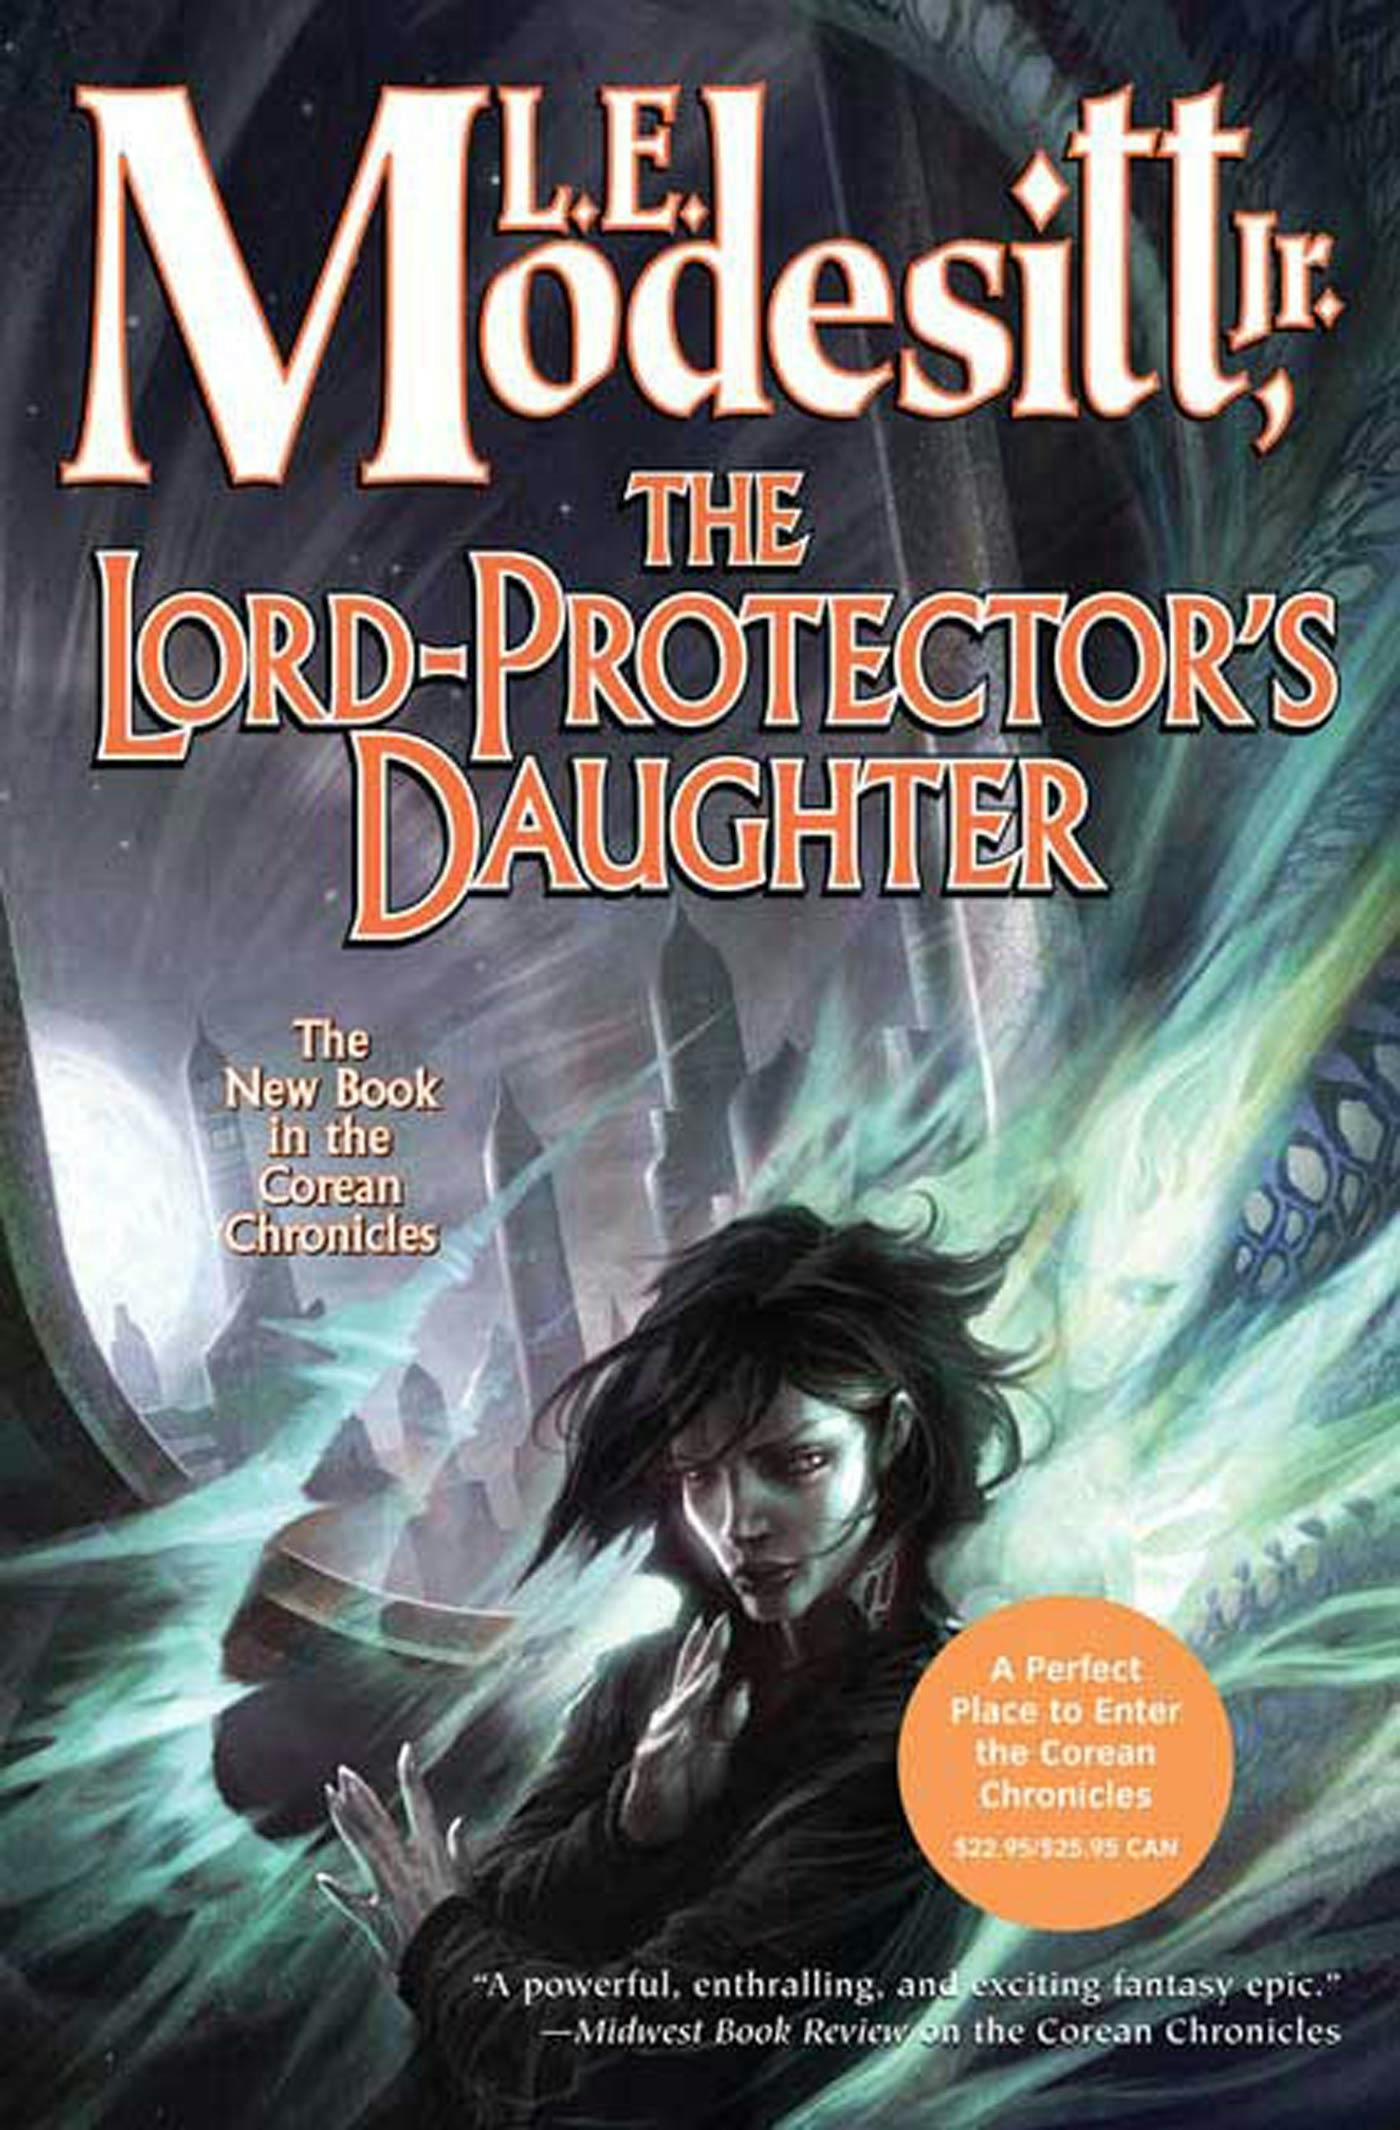 Cover for the book titled as: The Lord-Protector's Daughter